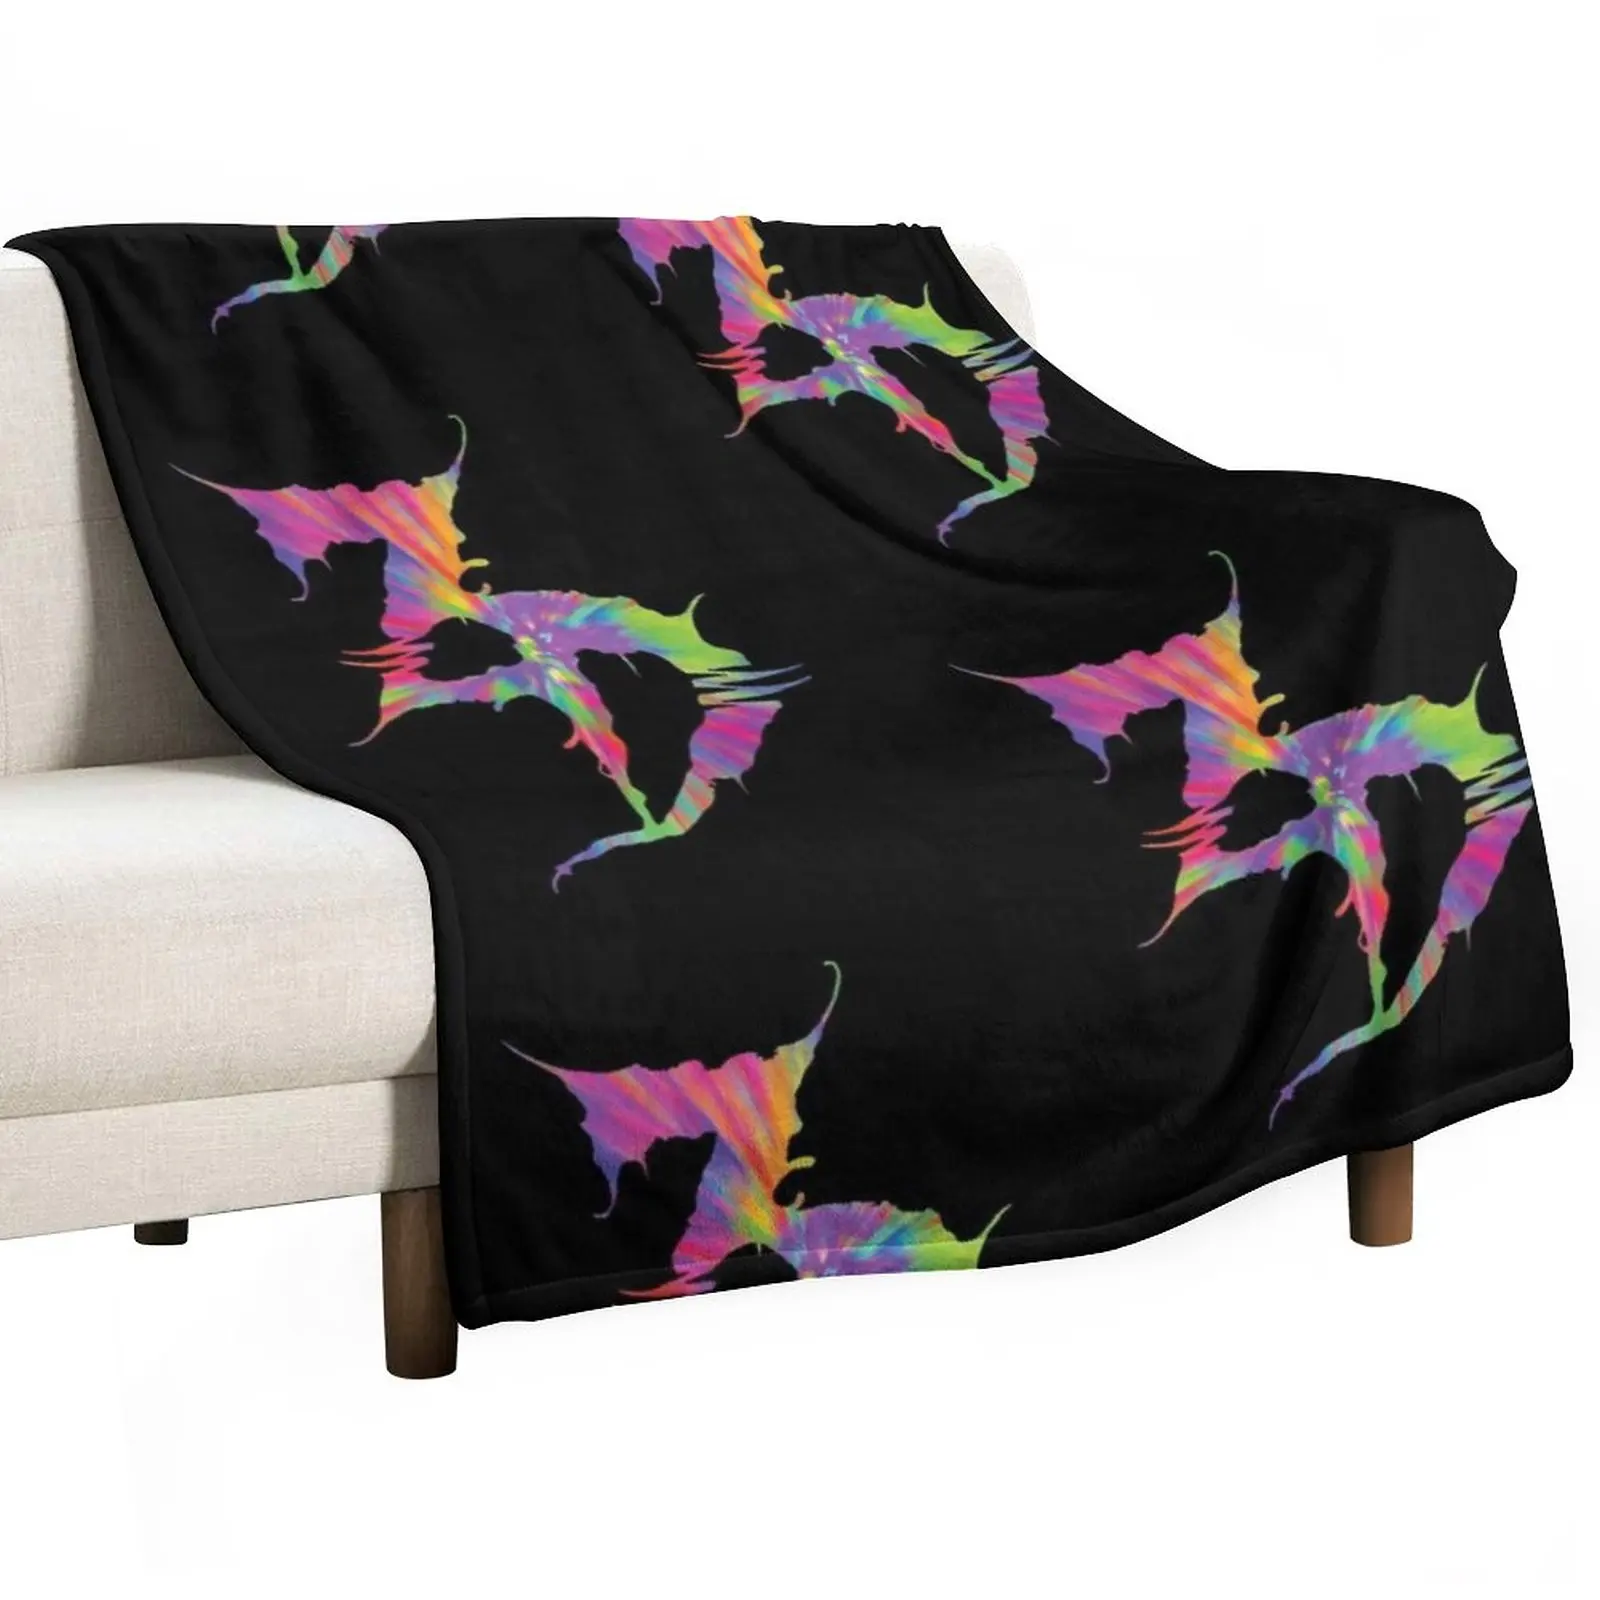 

Zeds Dead Throw Blanket valentine gift ideas Heavy Blanket Extra Large Throw Blanket For Sofa Thin